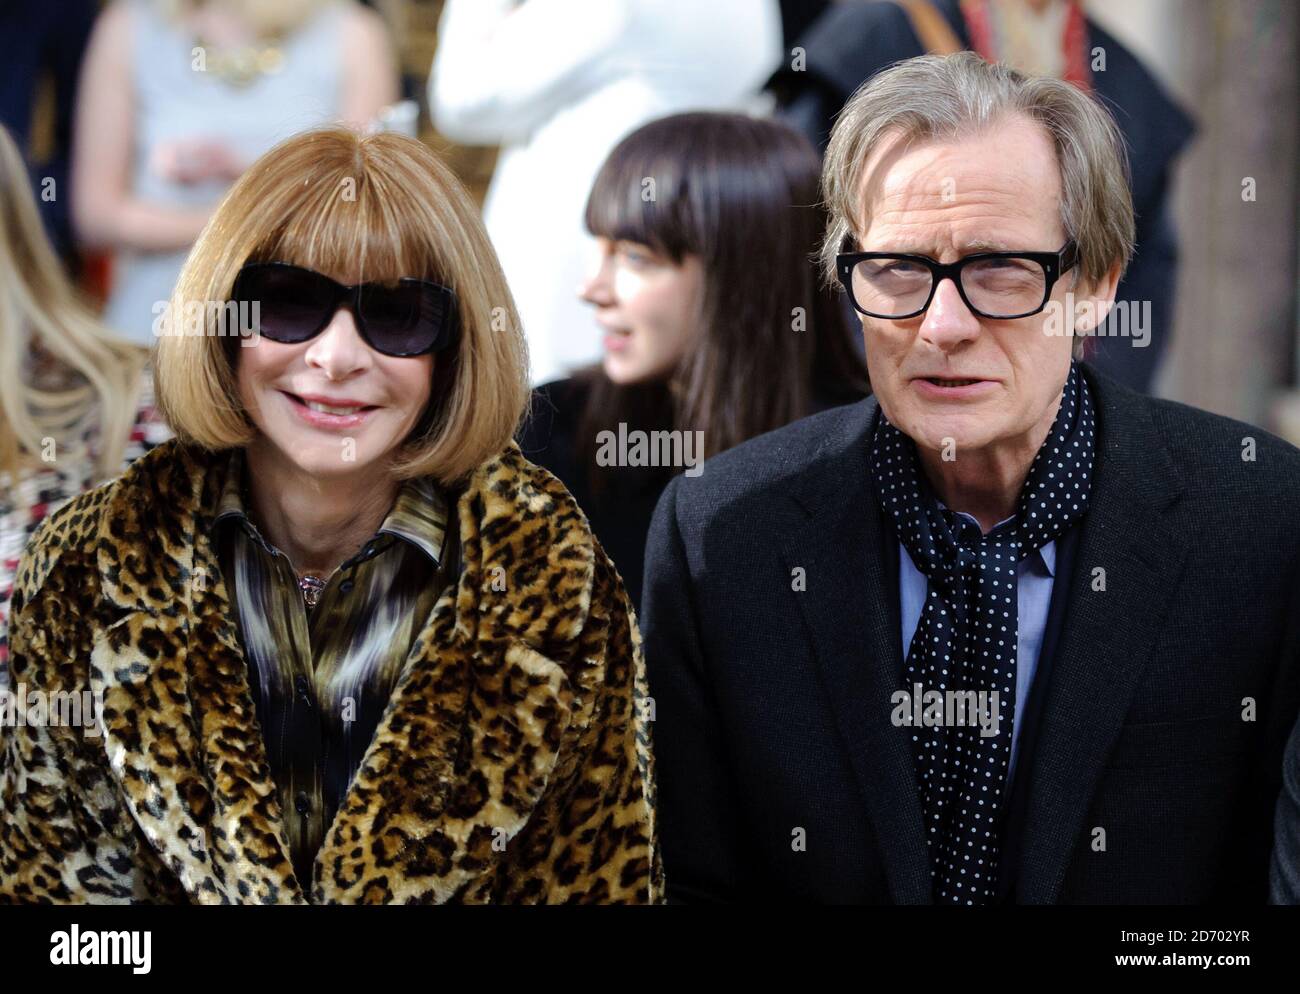 Anna Wintour and Bill Nighy attending the Nicole Farhi fashion show, held at the Royal Courts of Justice as part of London Fashion Week. Stock Photo